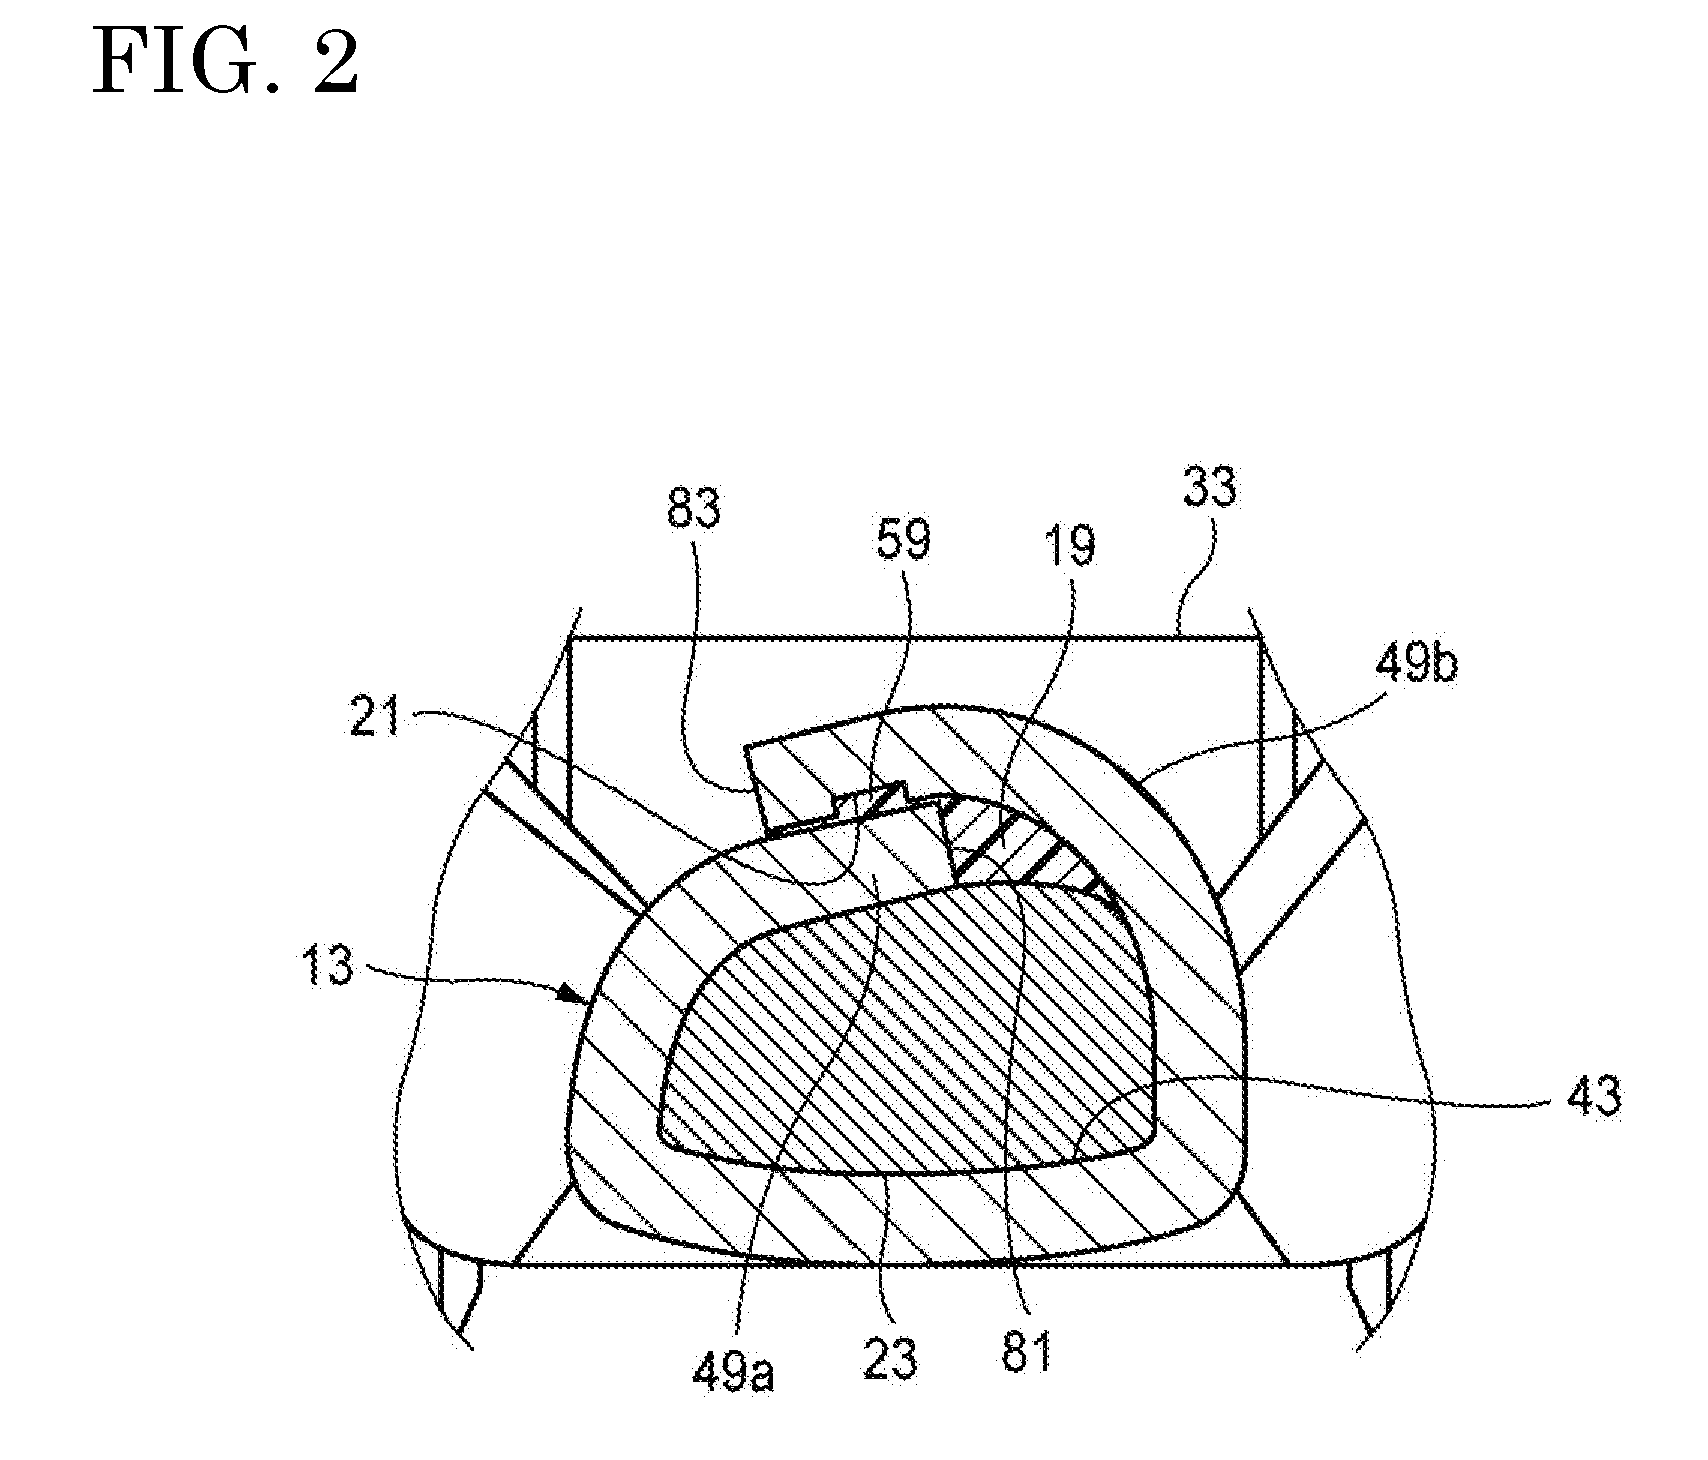 Structure for connecting crimping terminal and electric wire